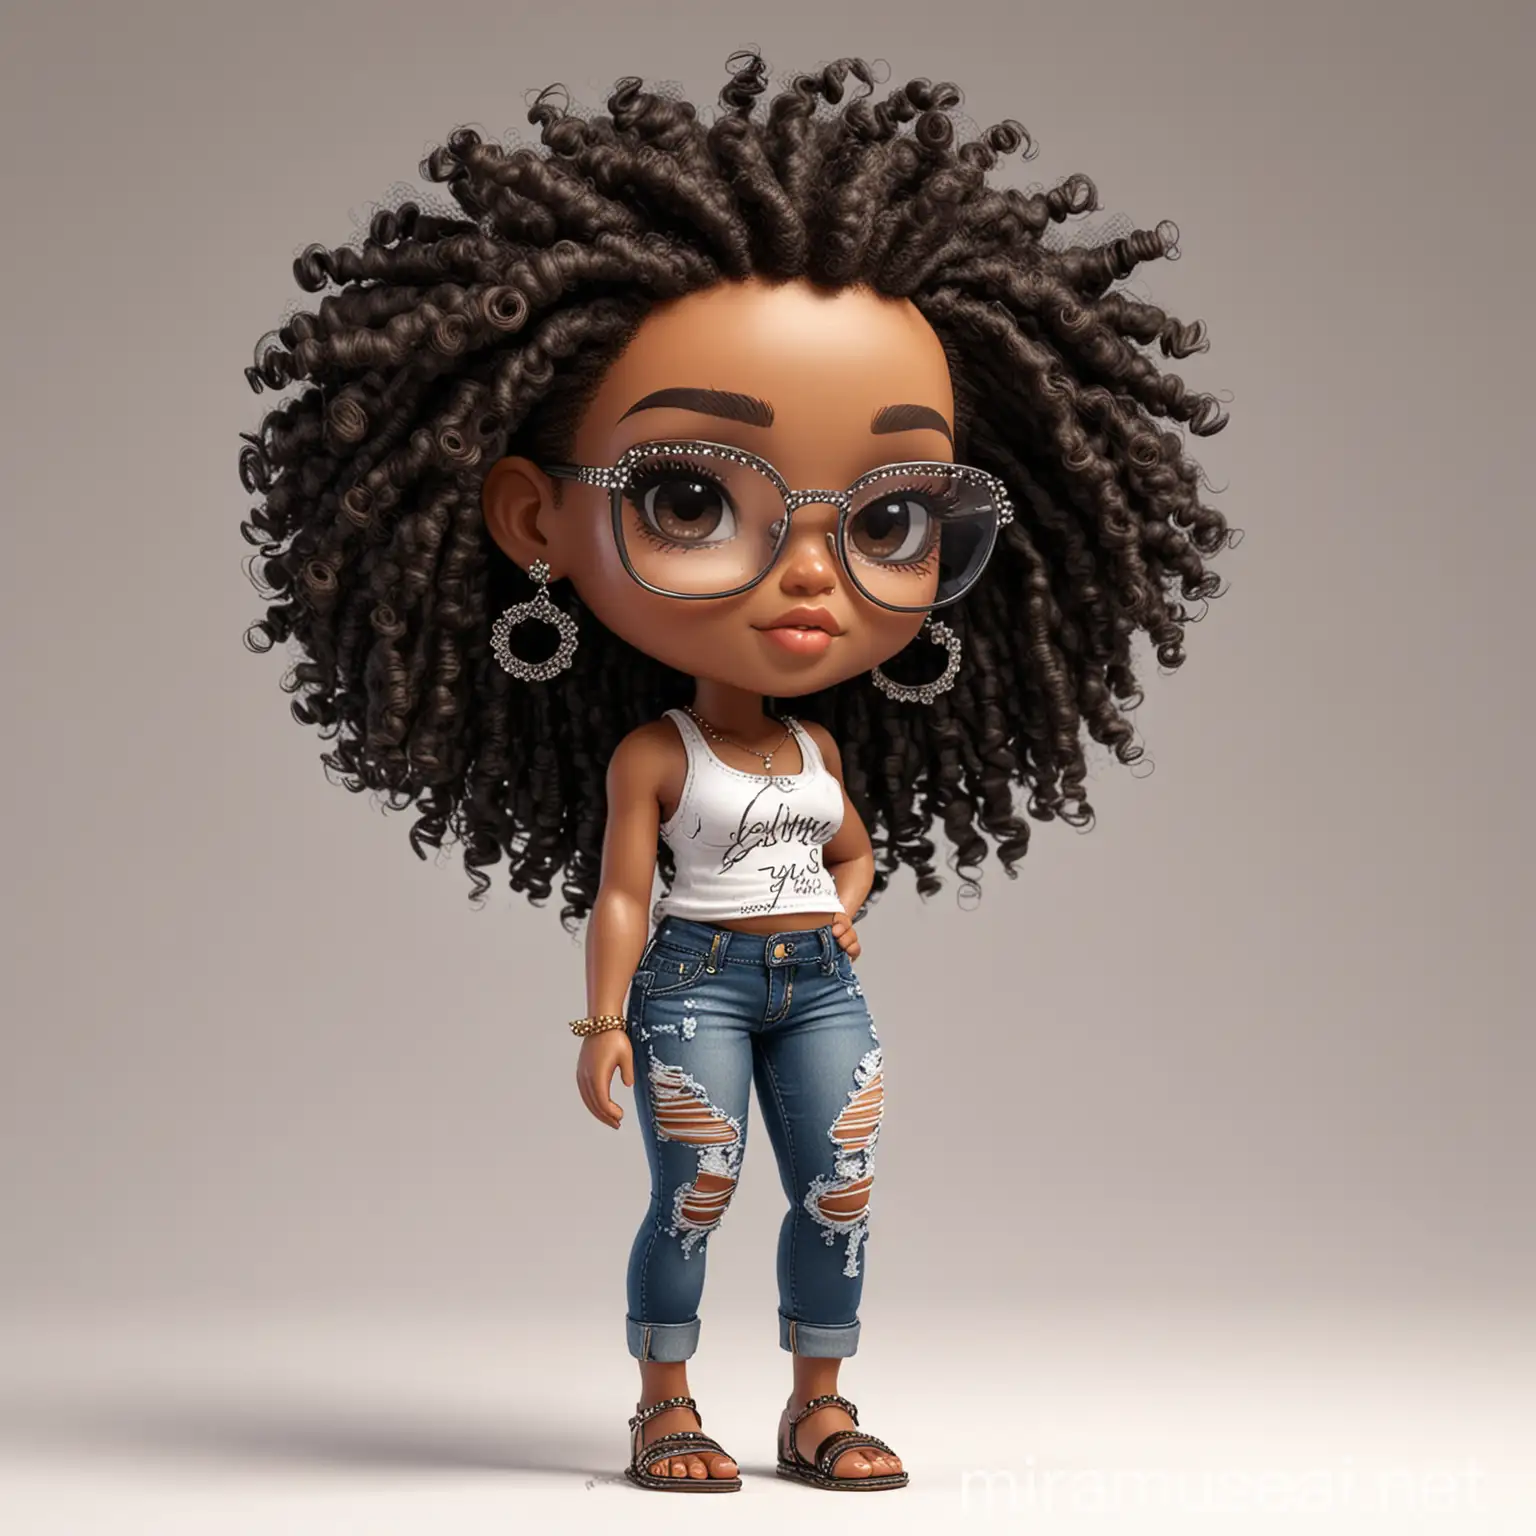 Create a absract art style image chibi image of a black female with shoulder length tightly curl afro in bun, black silky and brown eyes. Long eye lashes wearing a torn jeans and tank top with diamond studded "pretty" on the front, sandals , plus size body style. Diamond studded glasses and hoop earrings forward facing, 2k, white background